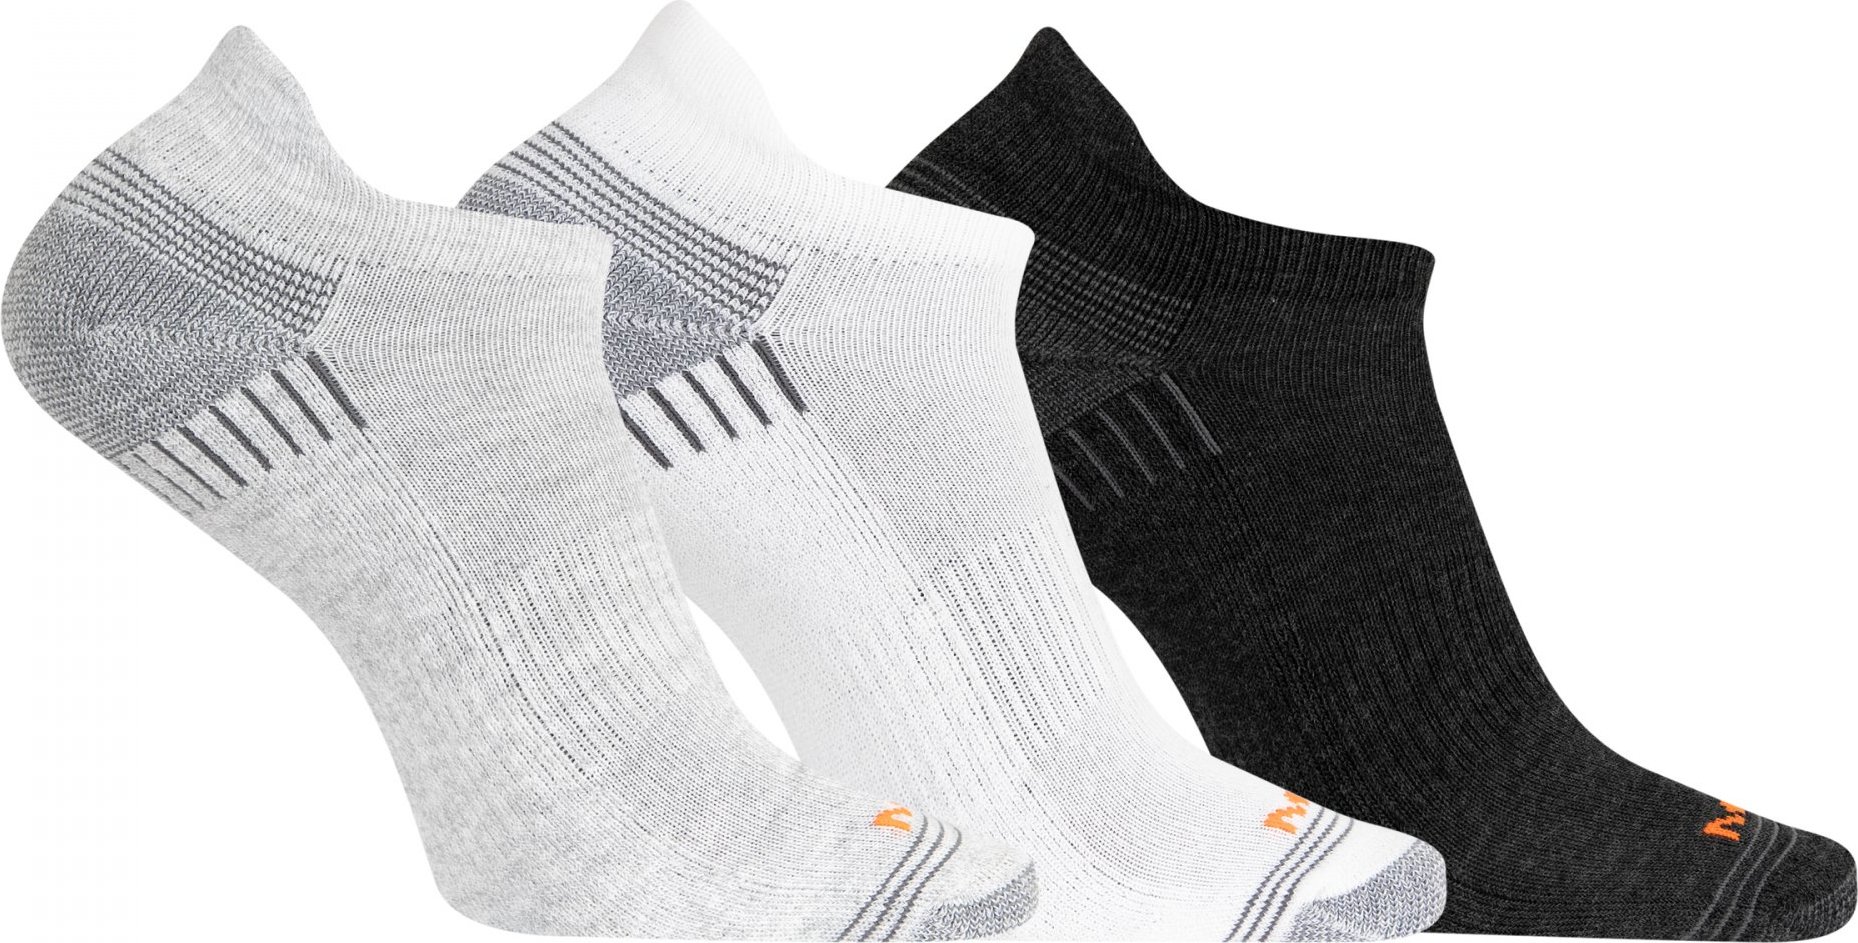 Ponožky MERRELL Recycled Everyday Tab (3 pack) Velikost: S/M